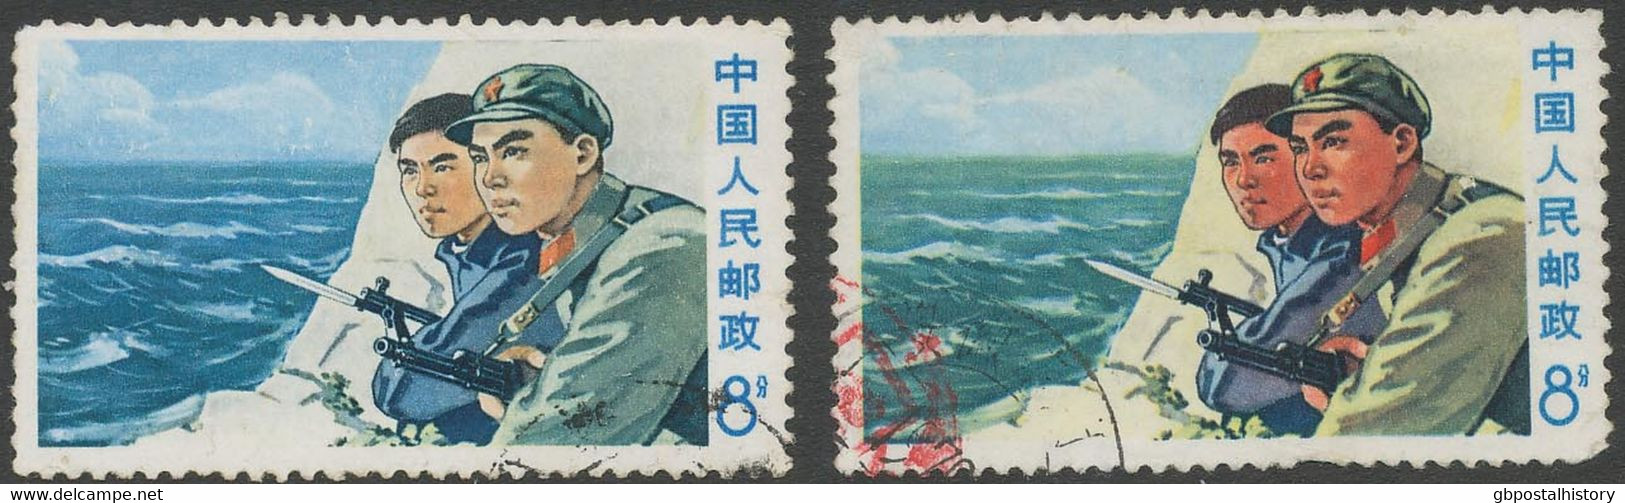 PEOPLES REPUBLIC OF CHINA 1969 Guarding The Coast 8 F. Fine Used Usual Perforation, MAJOR VARIETY: Missing Color Yellow - Used Stamps